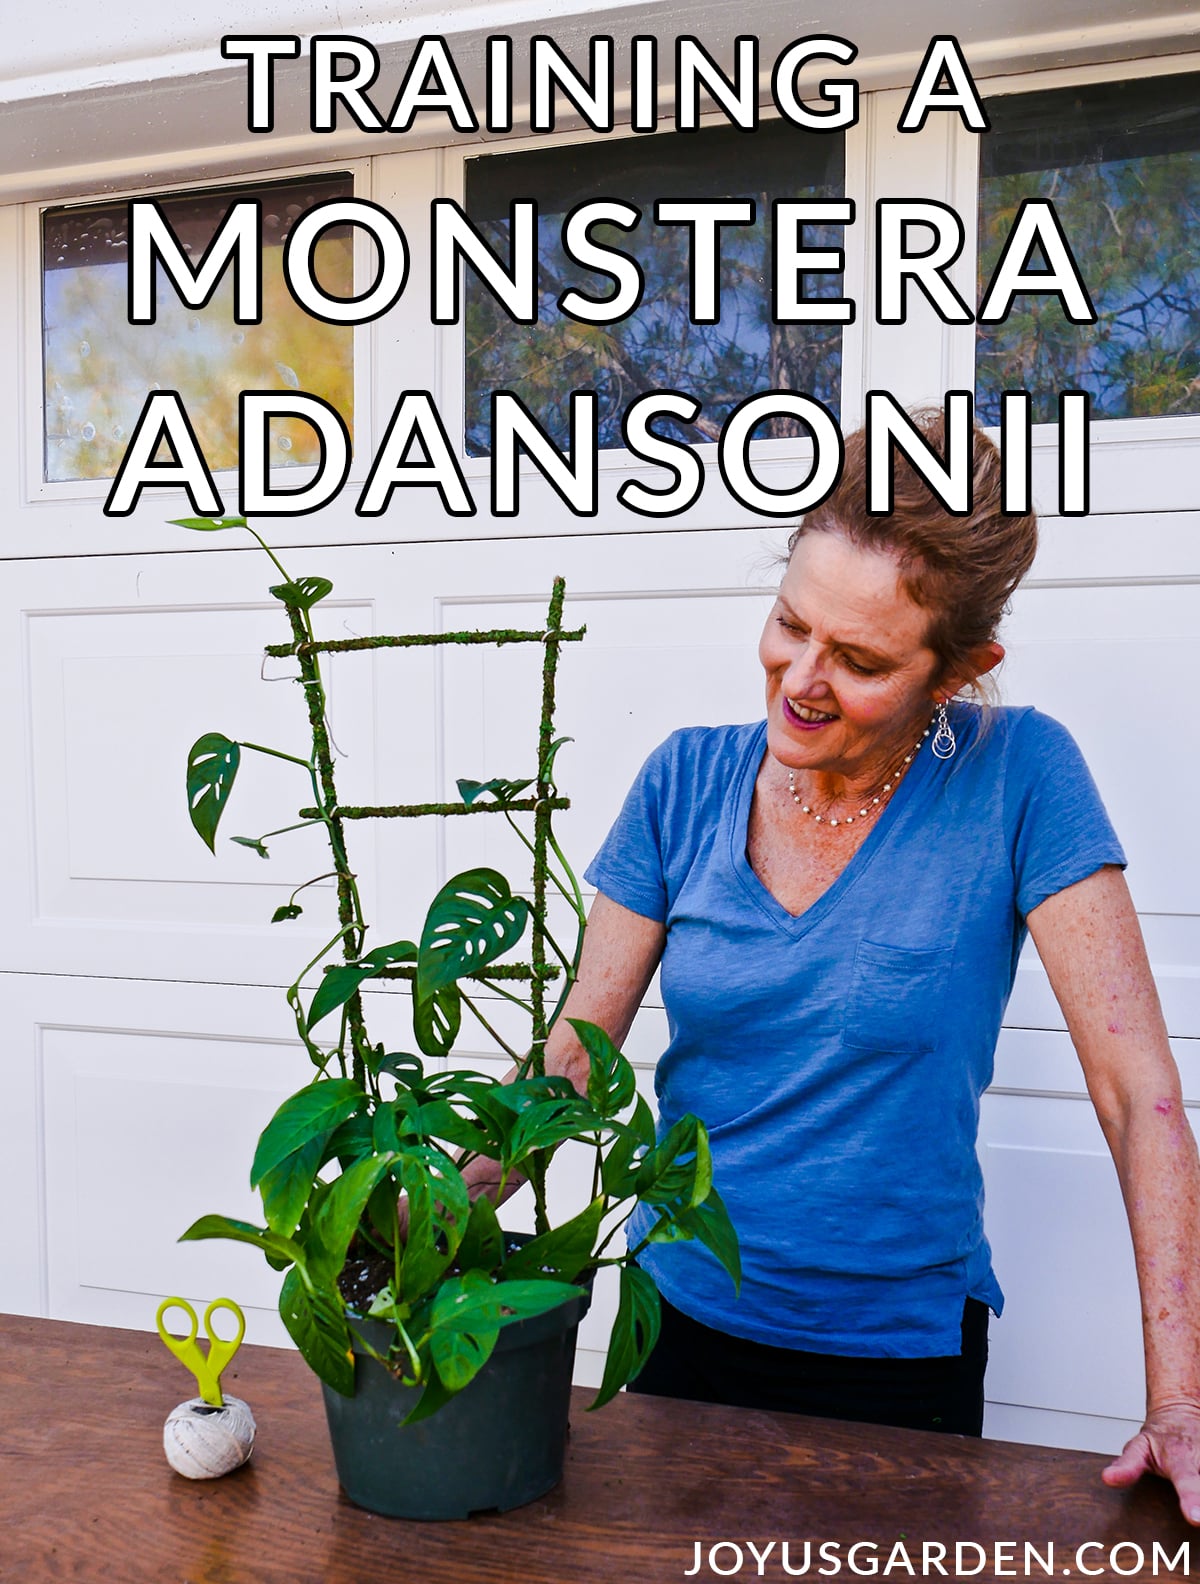 nell foster looks at a monstera adansonii swiss cheese vine growing up a moss trellis the text reads training a monstera adansonii